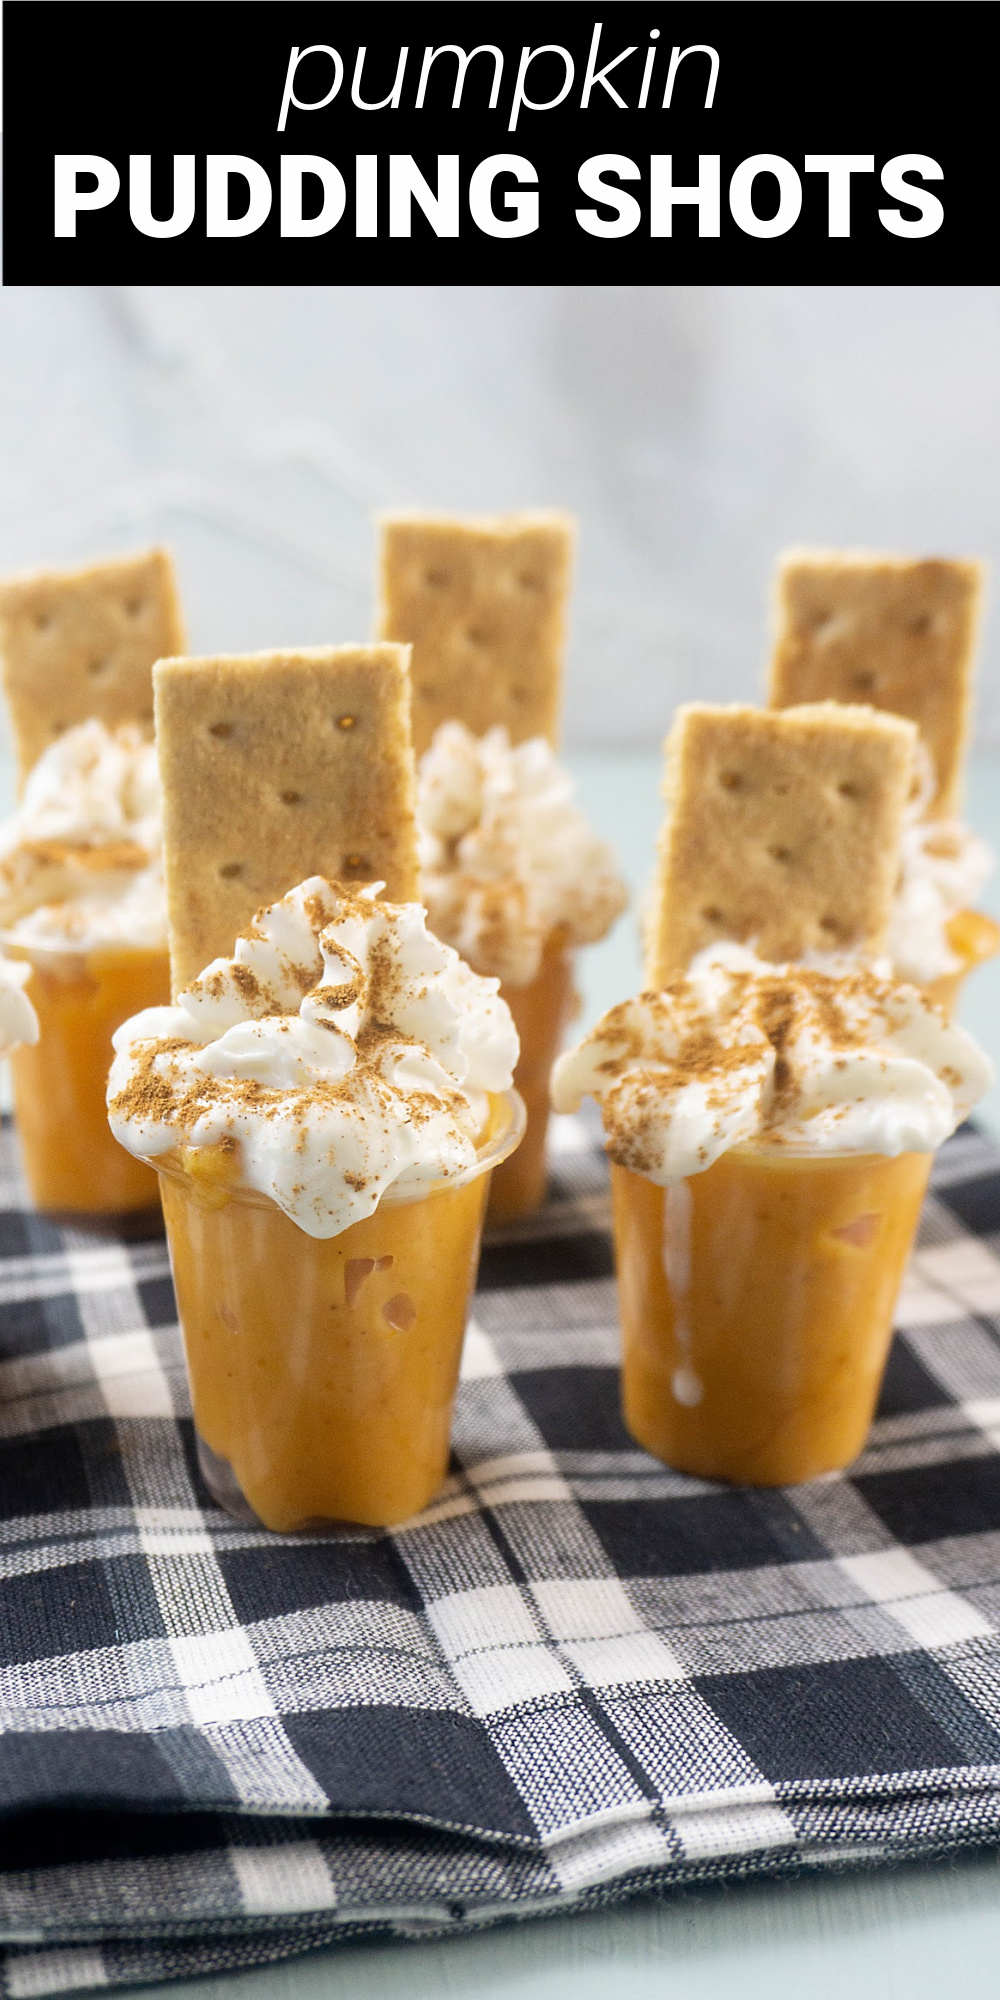 Pumpkin pudding shots are a little taste of pumpkin heaven served in a shot glass. Vanilla pudding is transformed into a creamy pumpkin pudding with all the flavors of fall. 